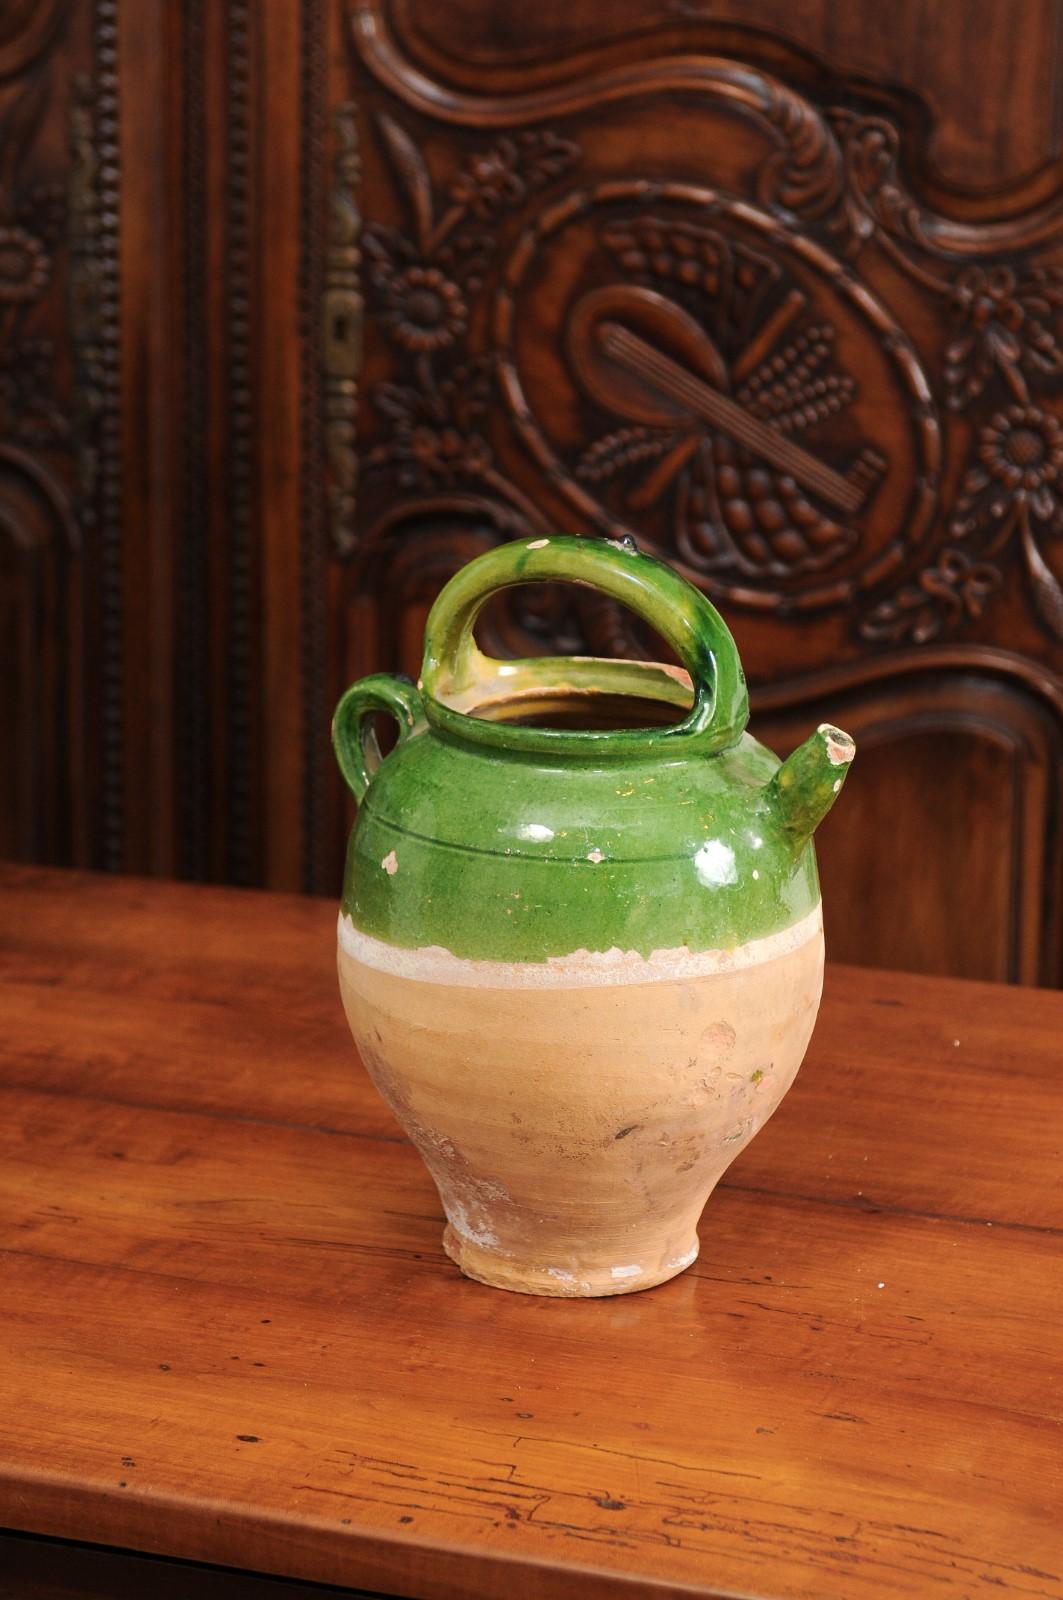 A French Provincial green glazed pottery jug from the 19th century, with two handles, front spout and distressed patina. Created in Southern France during the 19th century, this jug features a green glazed upper section perfectly balancing the